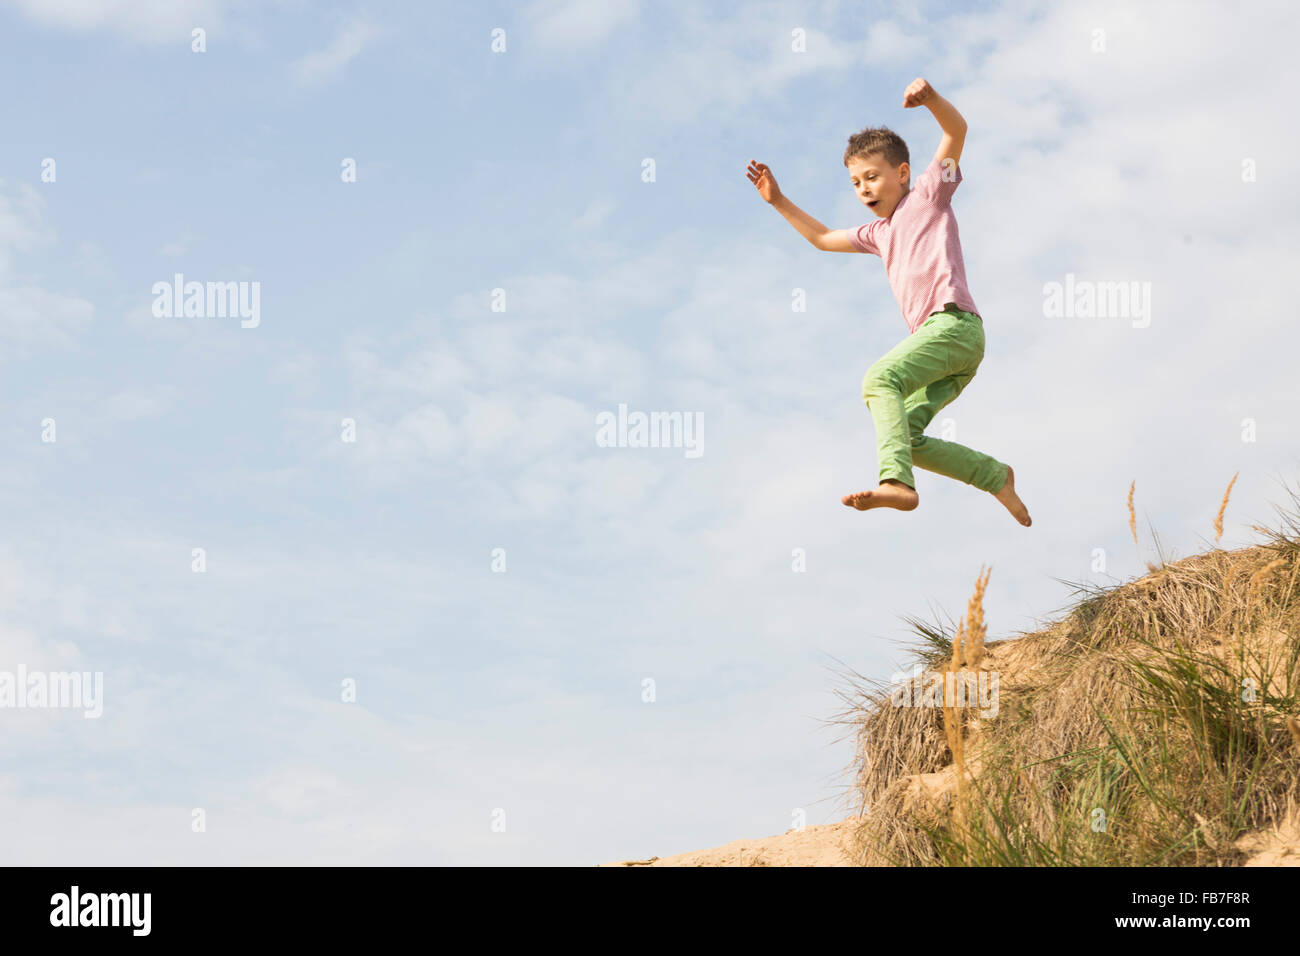 Low angle view of boy jumping against sky Stock Photo